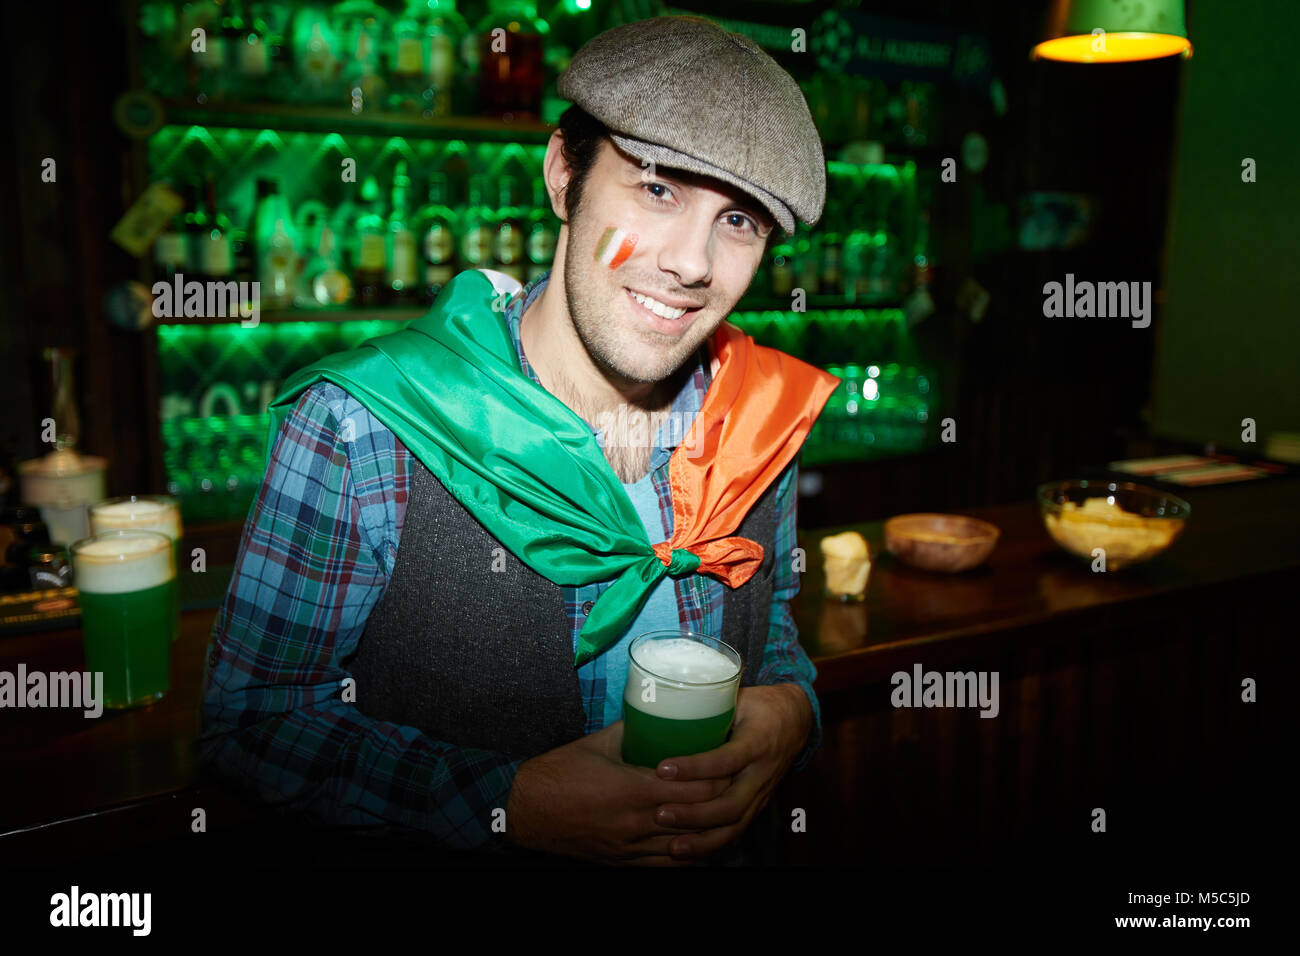 Young man in pub Stock Photo